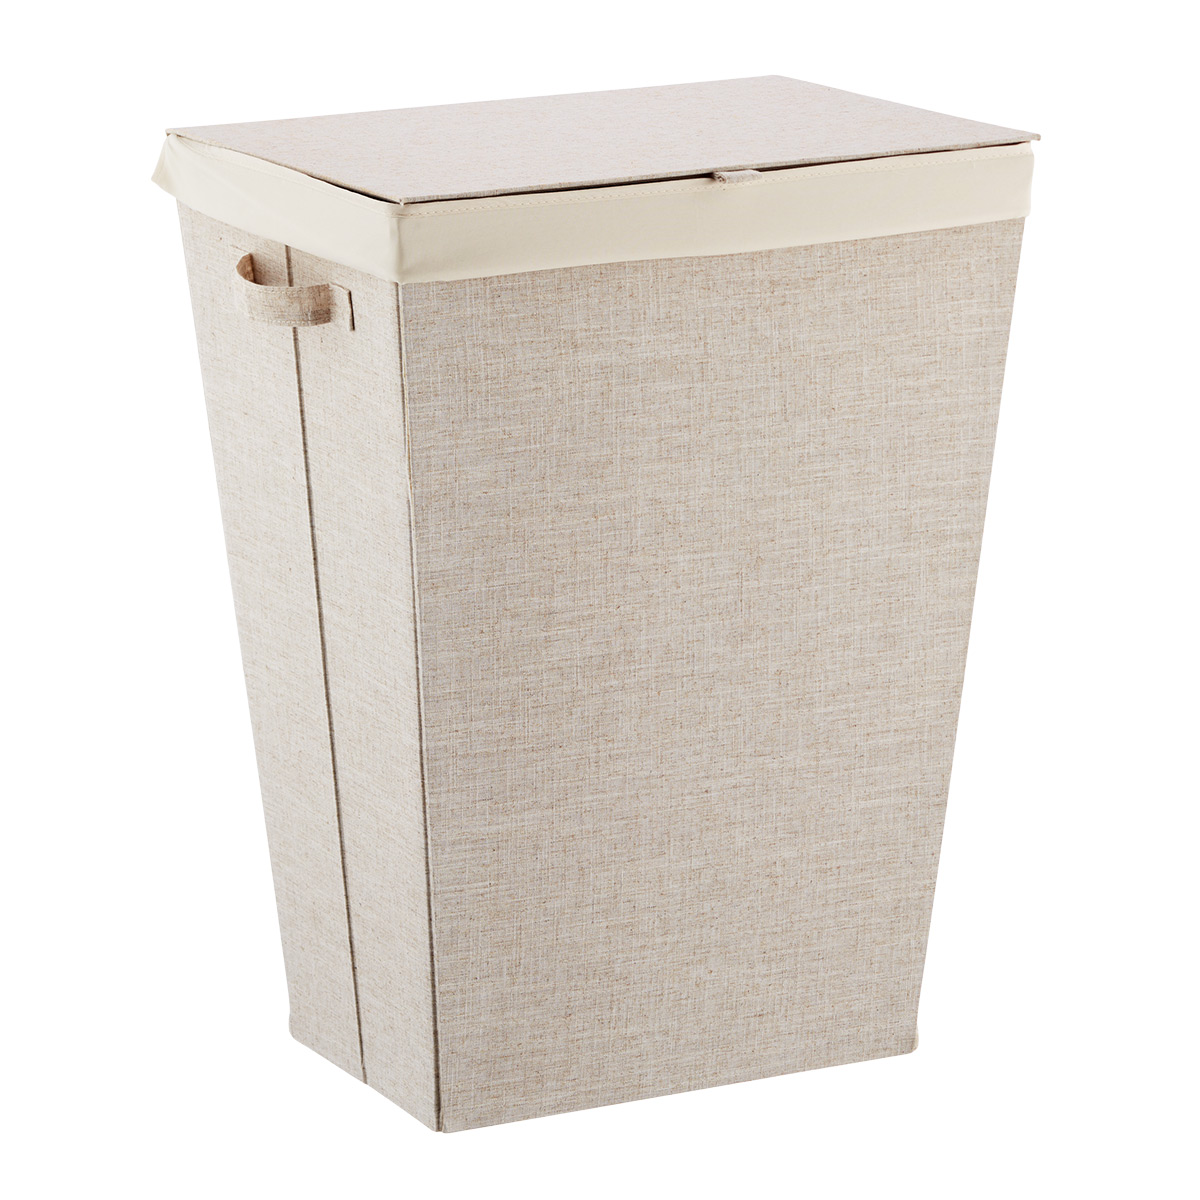 The Container Store Cambridge Tapered Hamper Linen